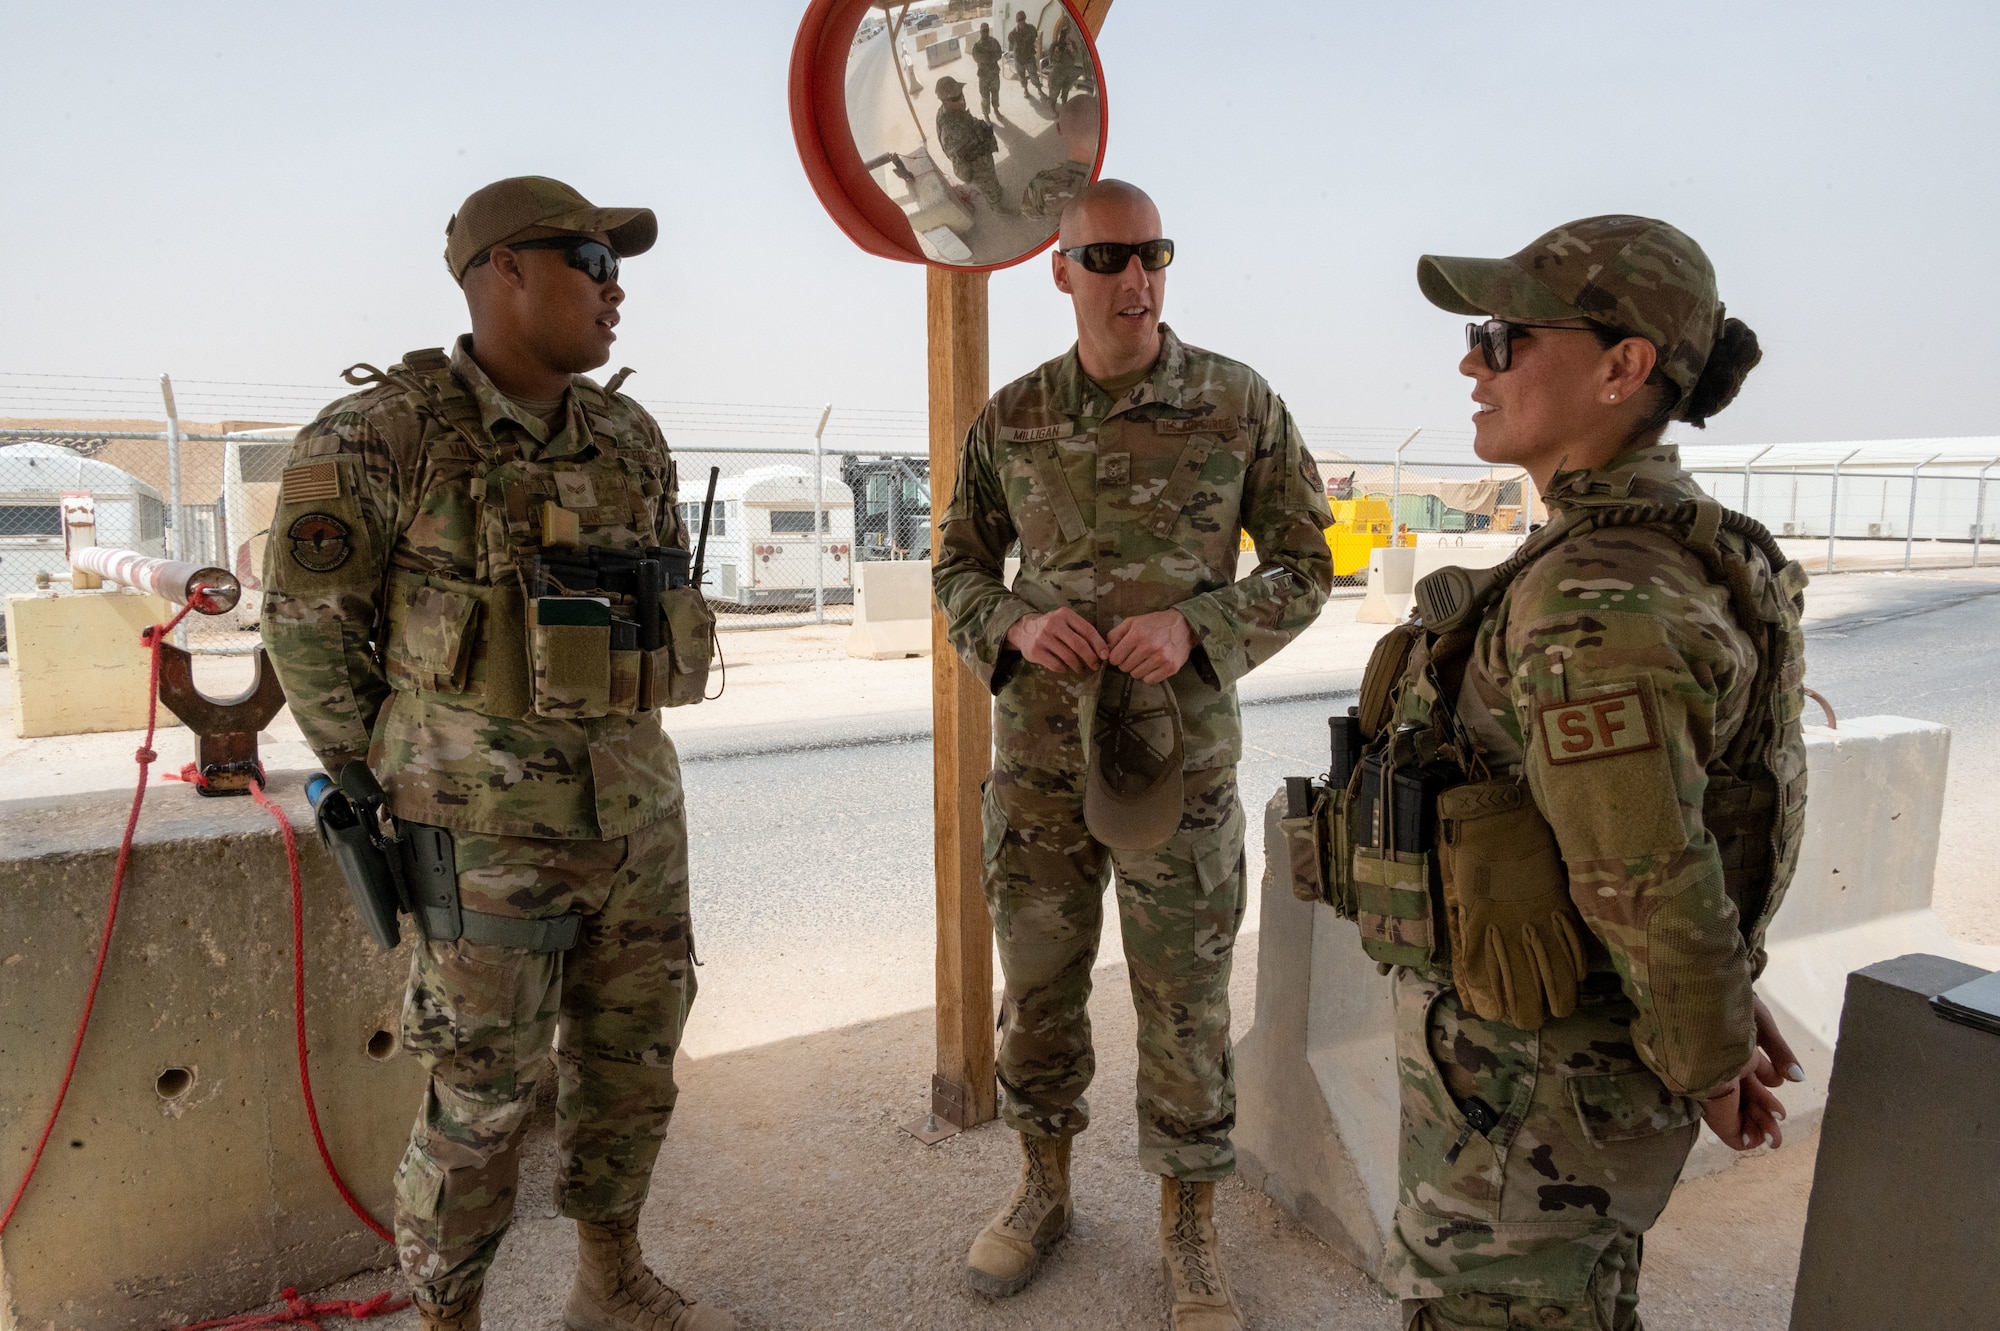 U.S. Air Force Chief Master Sgt. Sean M. Milligan, 332d Air Expeditionary Wing command chief, visits 332nd Expeditionary Security Forces Squadron Airmen at a controlled entry point gate at an undisclosed location in Southwest Asia, April 23, 2022. Chief Milligan's immersion visits give him a better understanding of the unique skillsets every Airman brings to the 332d AEW Red Tail team. (U.S. Air Force photo by Tech. Sgt. Lauren M. Snyder)